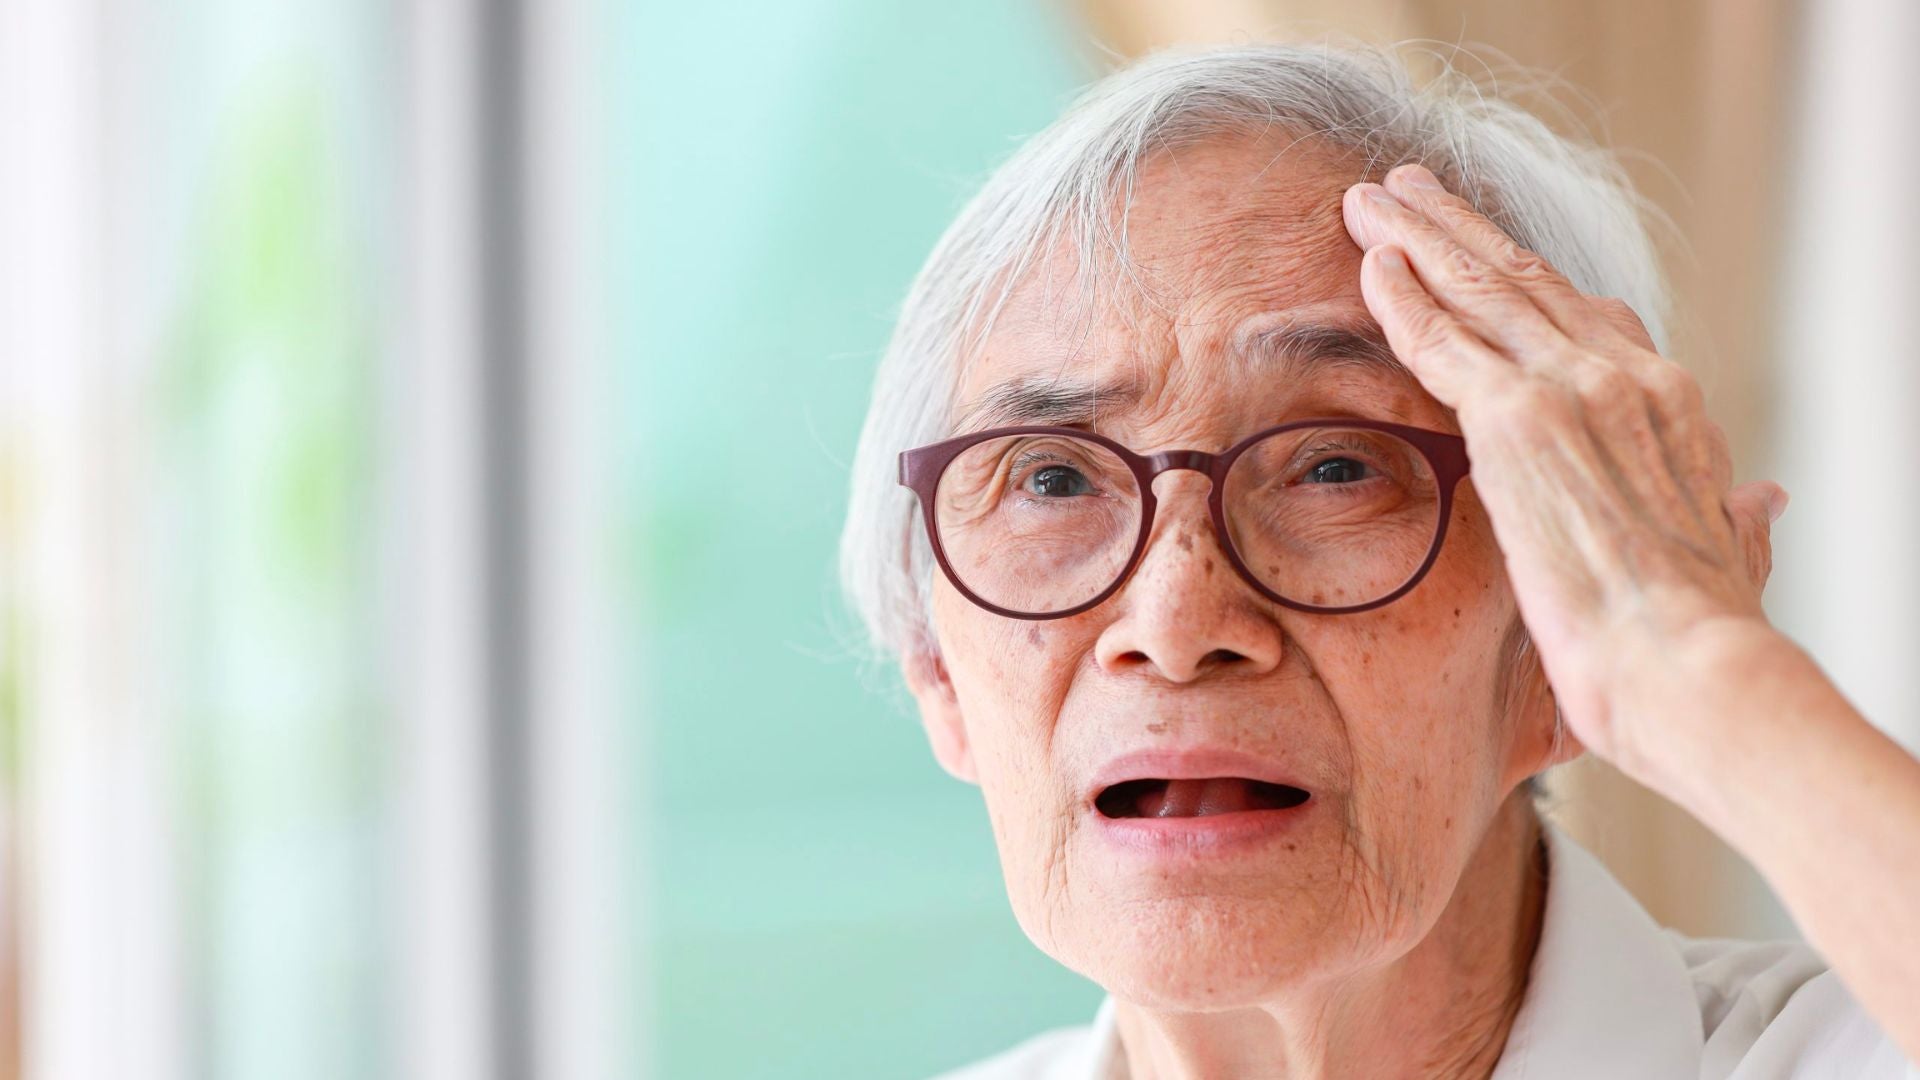 Hearing Aids: The Surprising Connection to Delaying Dementia